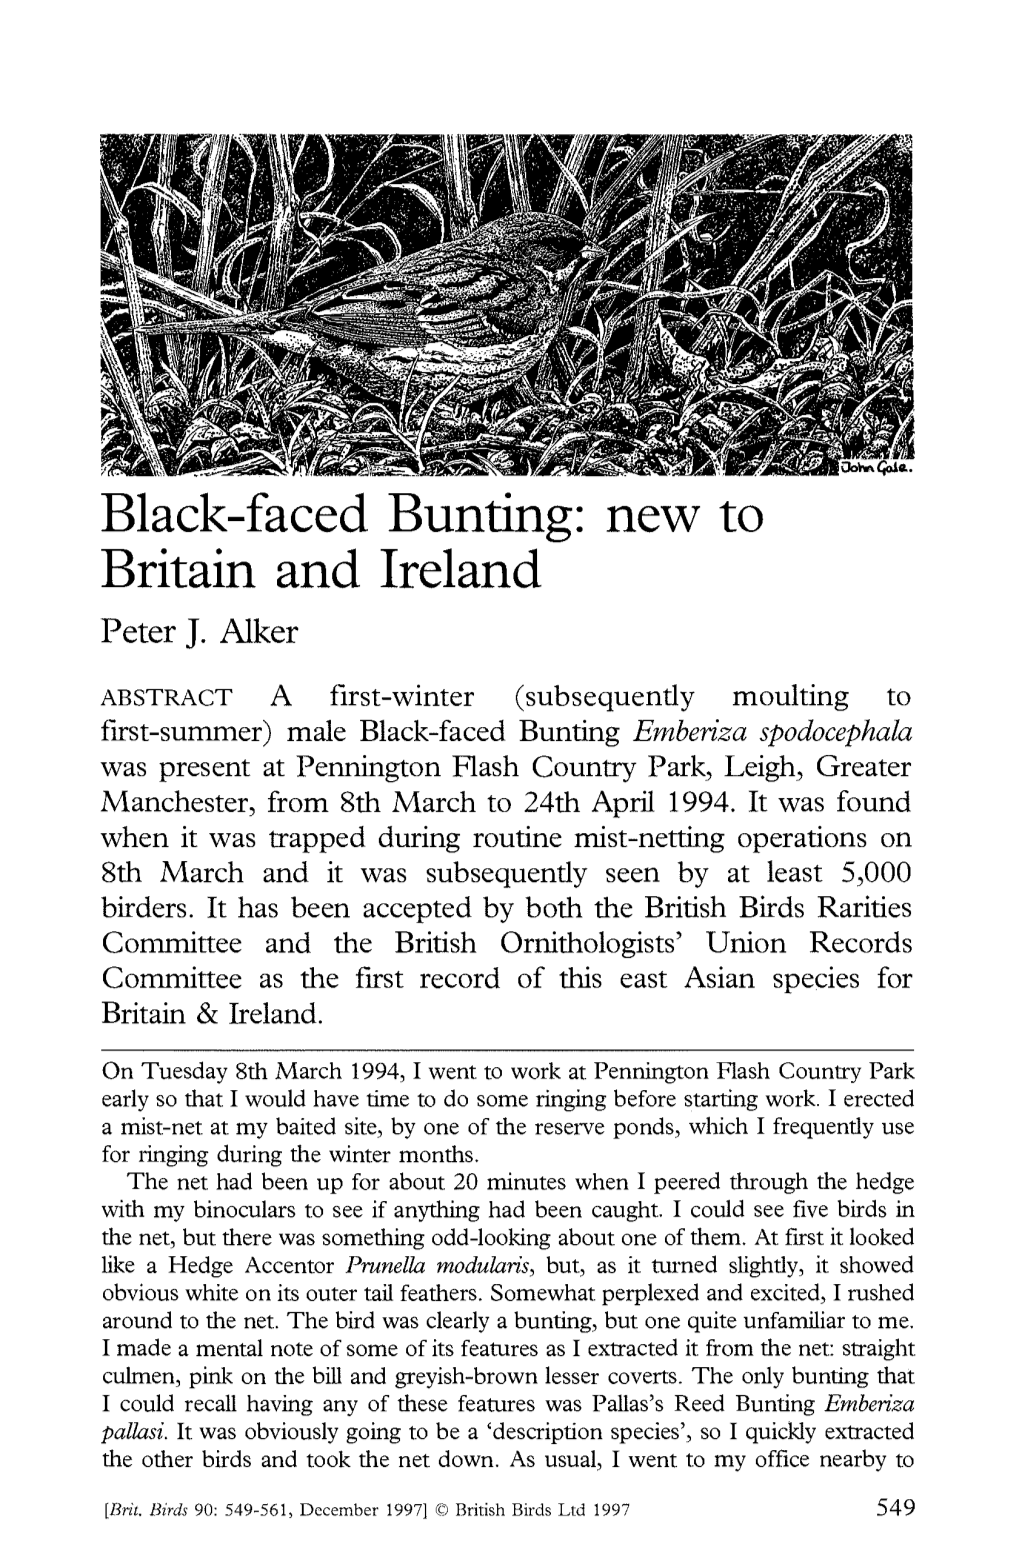 Black-Faced Bunting: New to Britain and Ireland Peter J